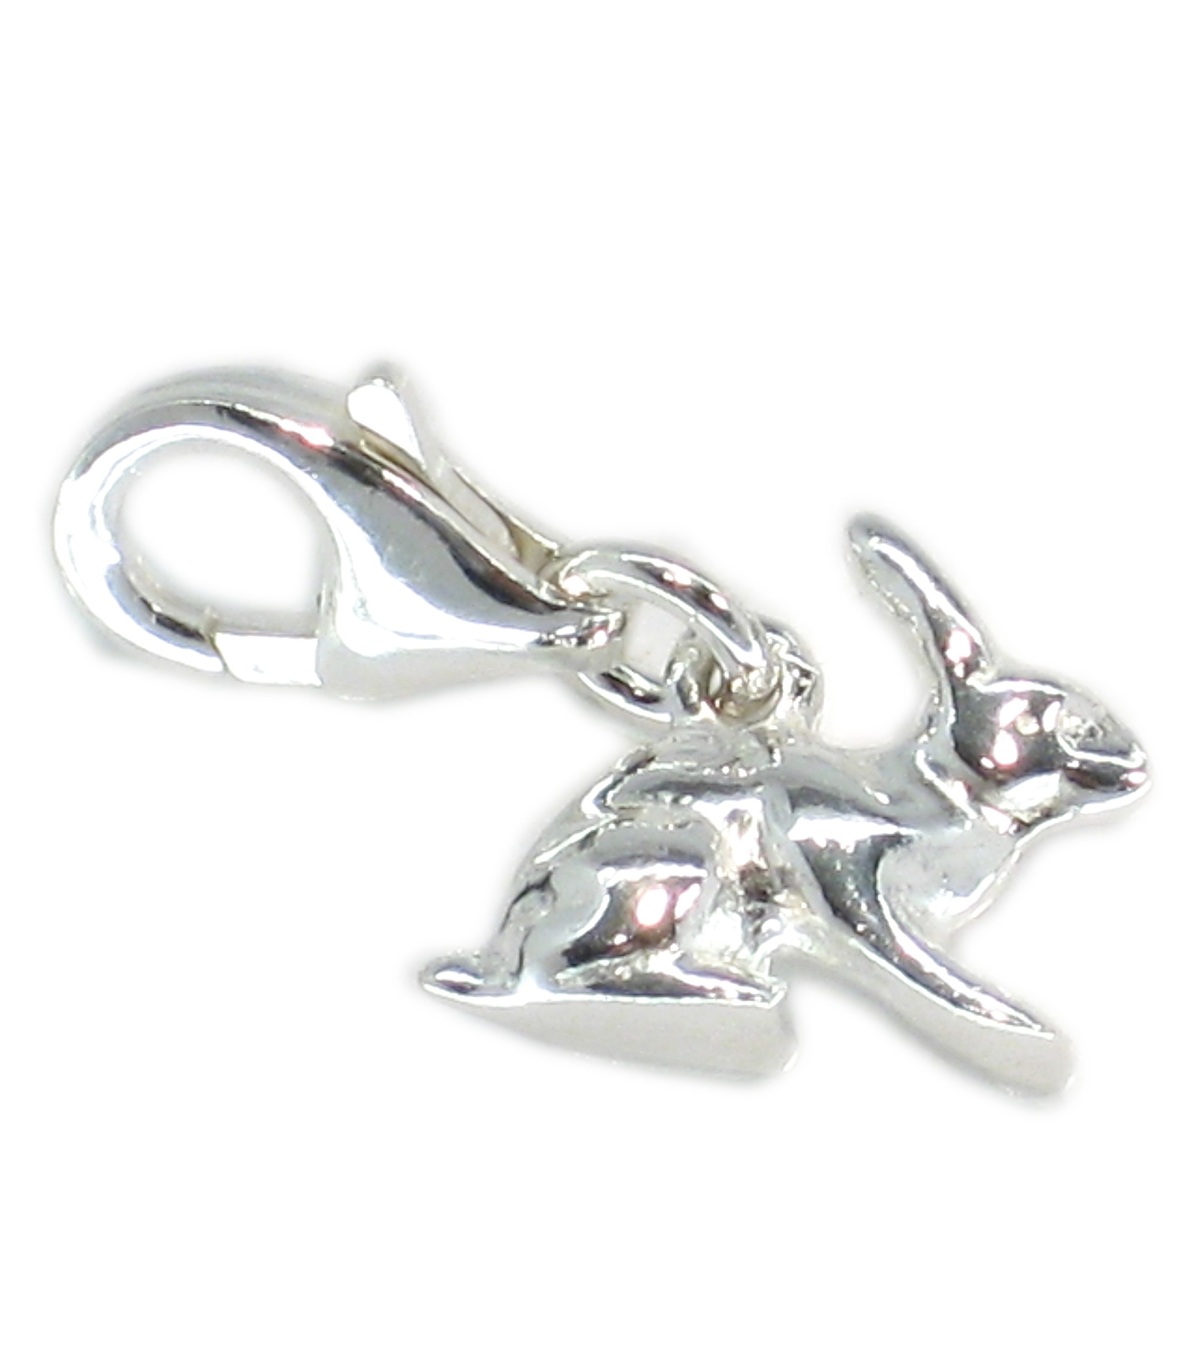 https://www.maldonjewellery.co.uk/68048-superlarge_default/rabbit-sterling-silver-charm-with-clip-link-925-x1-rabbits-bunny-charms.jpg